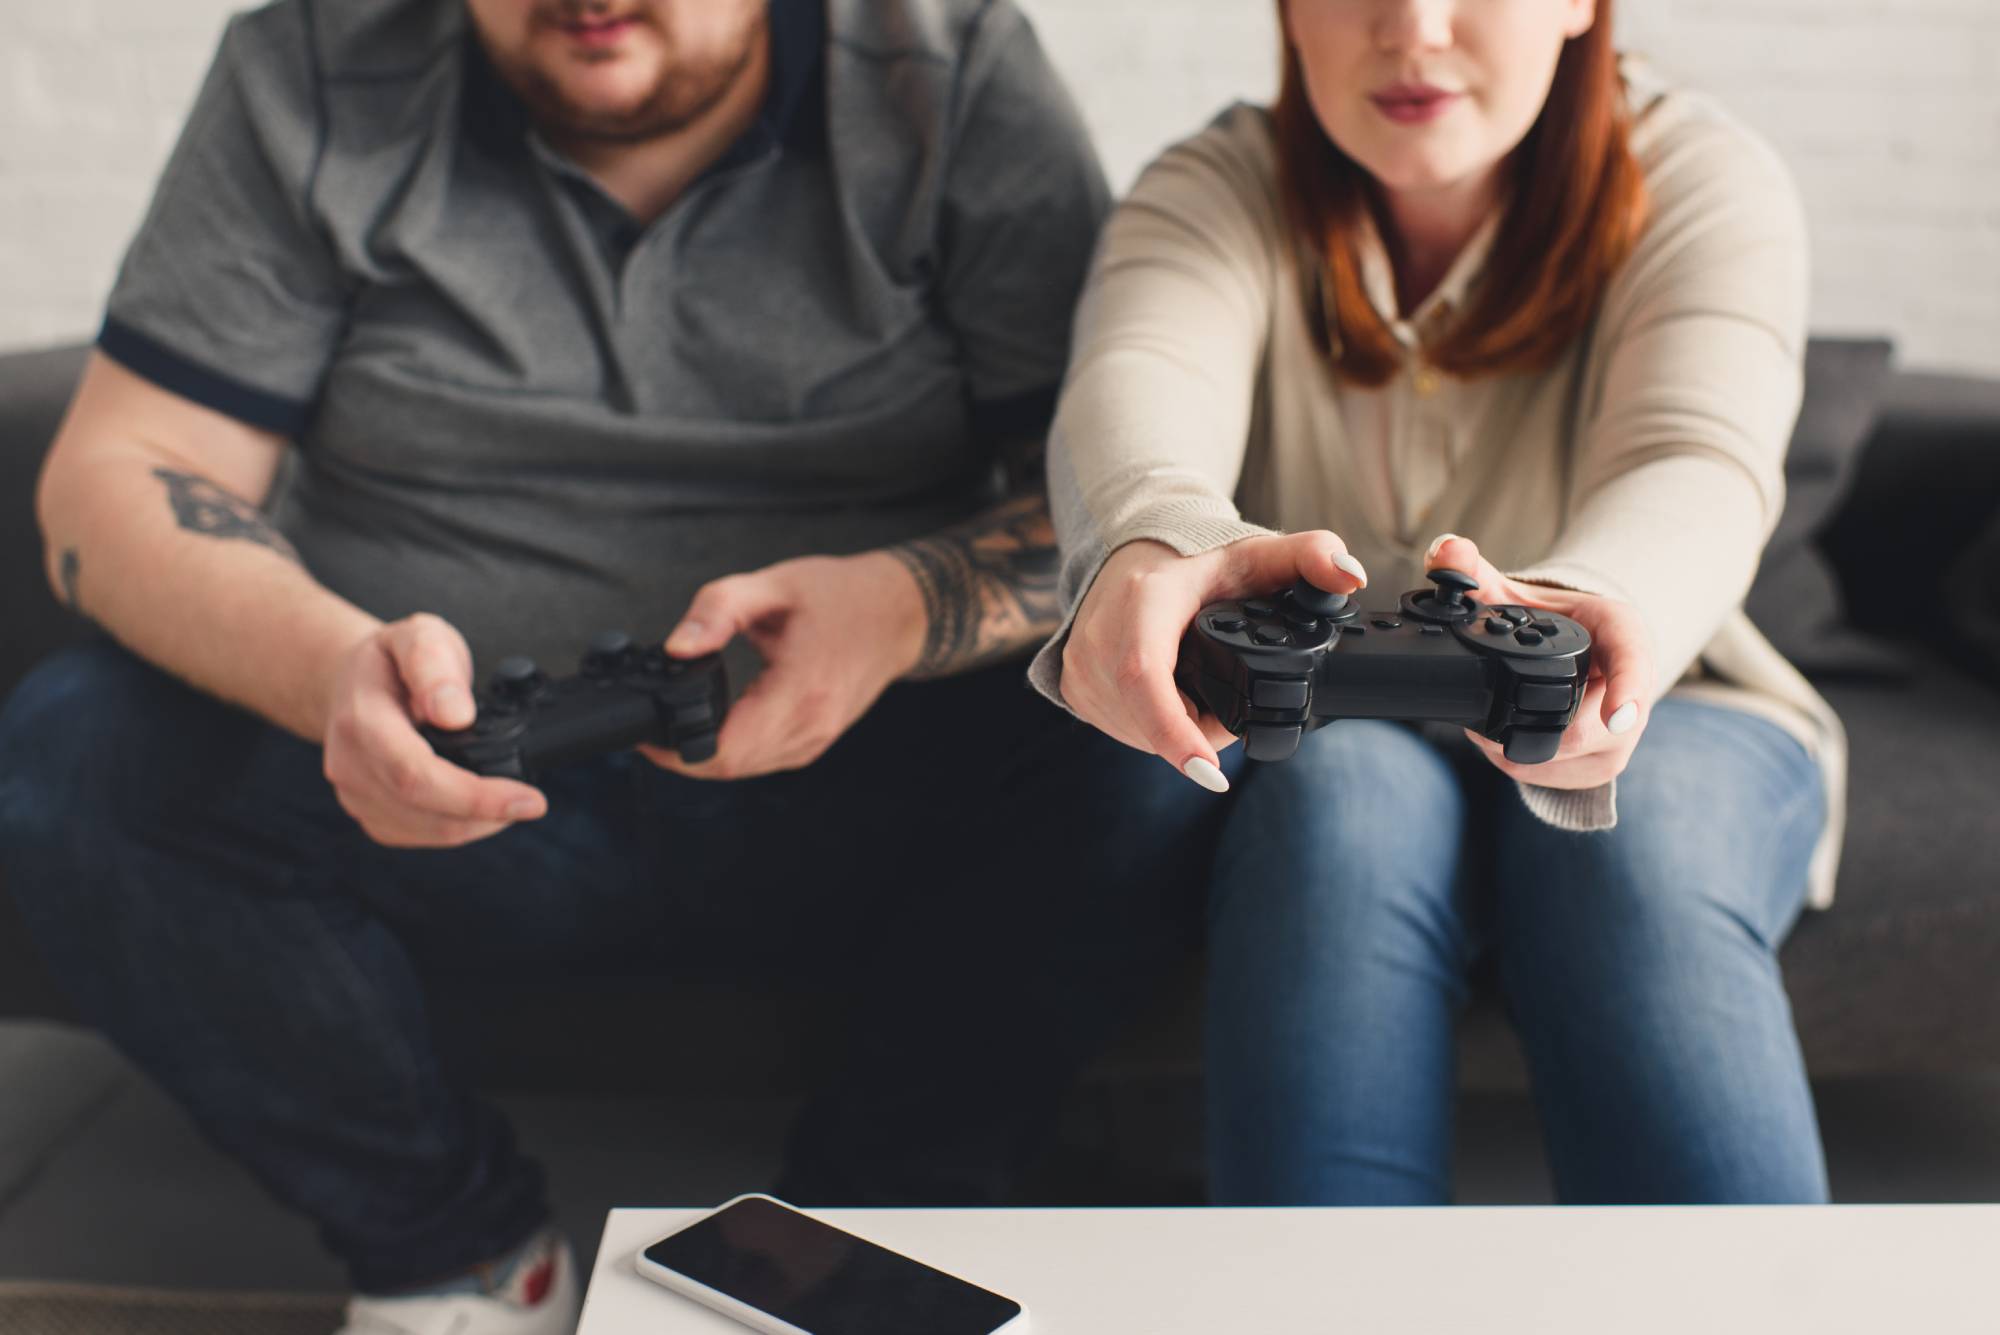 two gamers, male and female, sitting on the couch